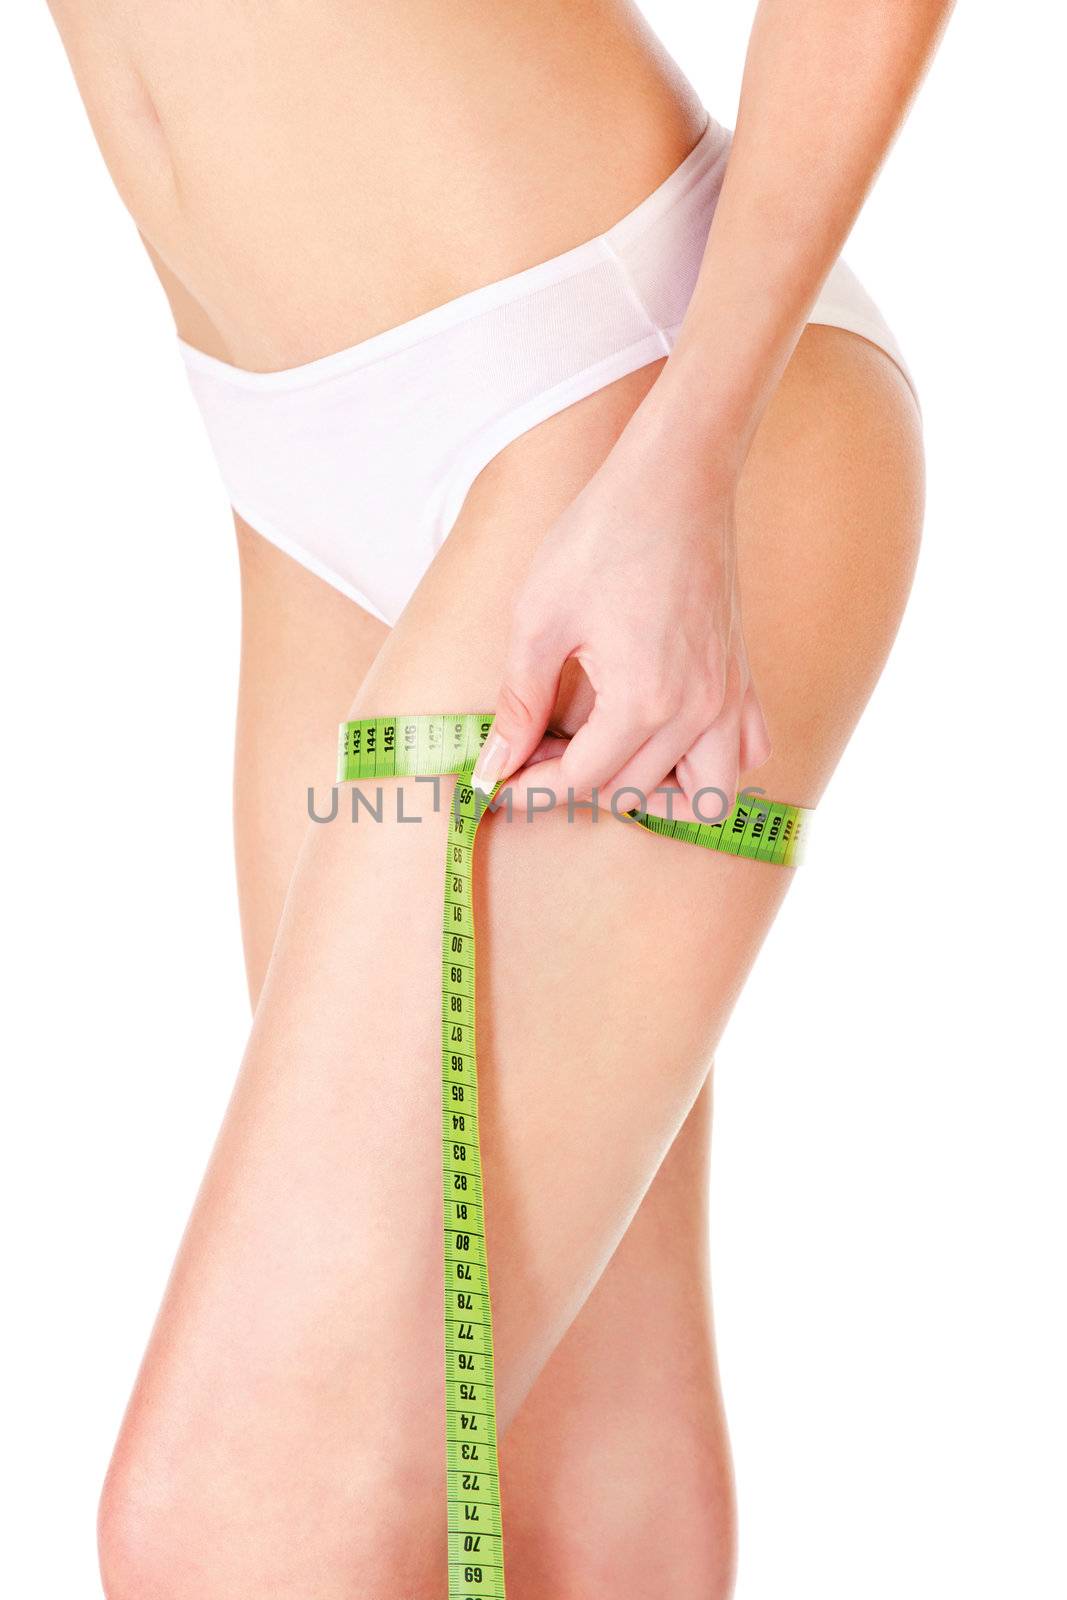 Measure tape around slim woman's leg, isolated on white. Health concept